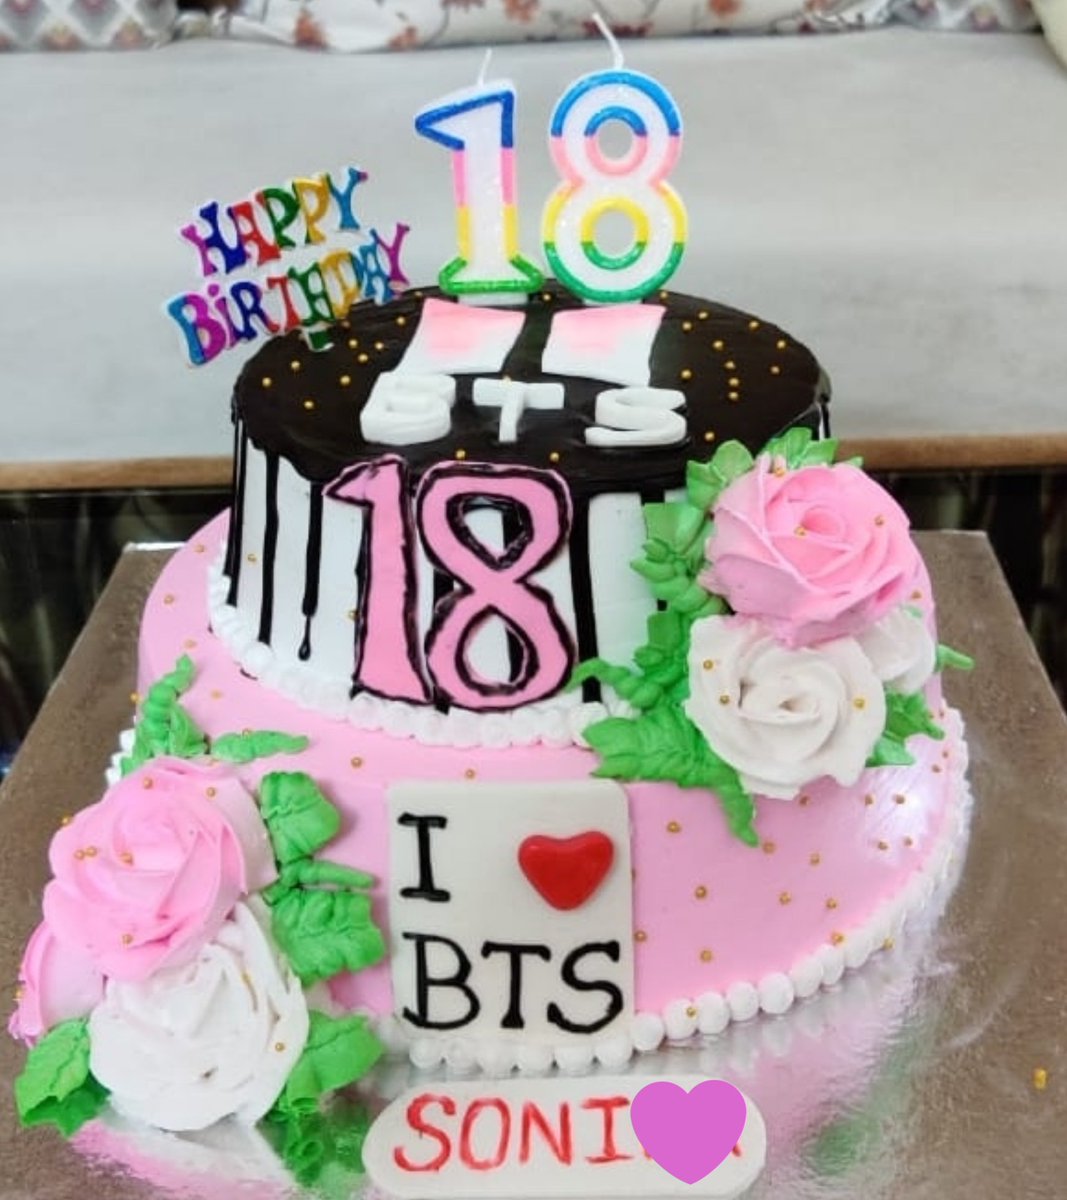 Guys look at my cake,it was a surprise from my mom 🥺🥺 #MTVHottest BTS @BTS_twt